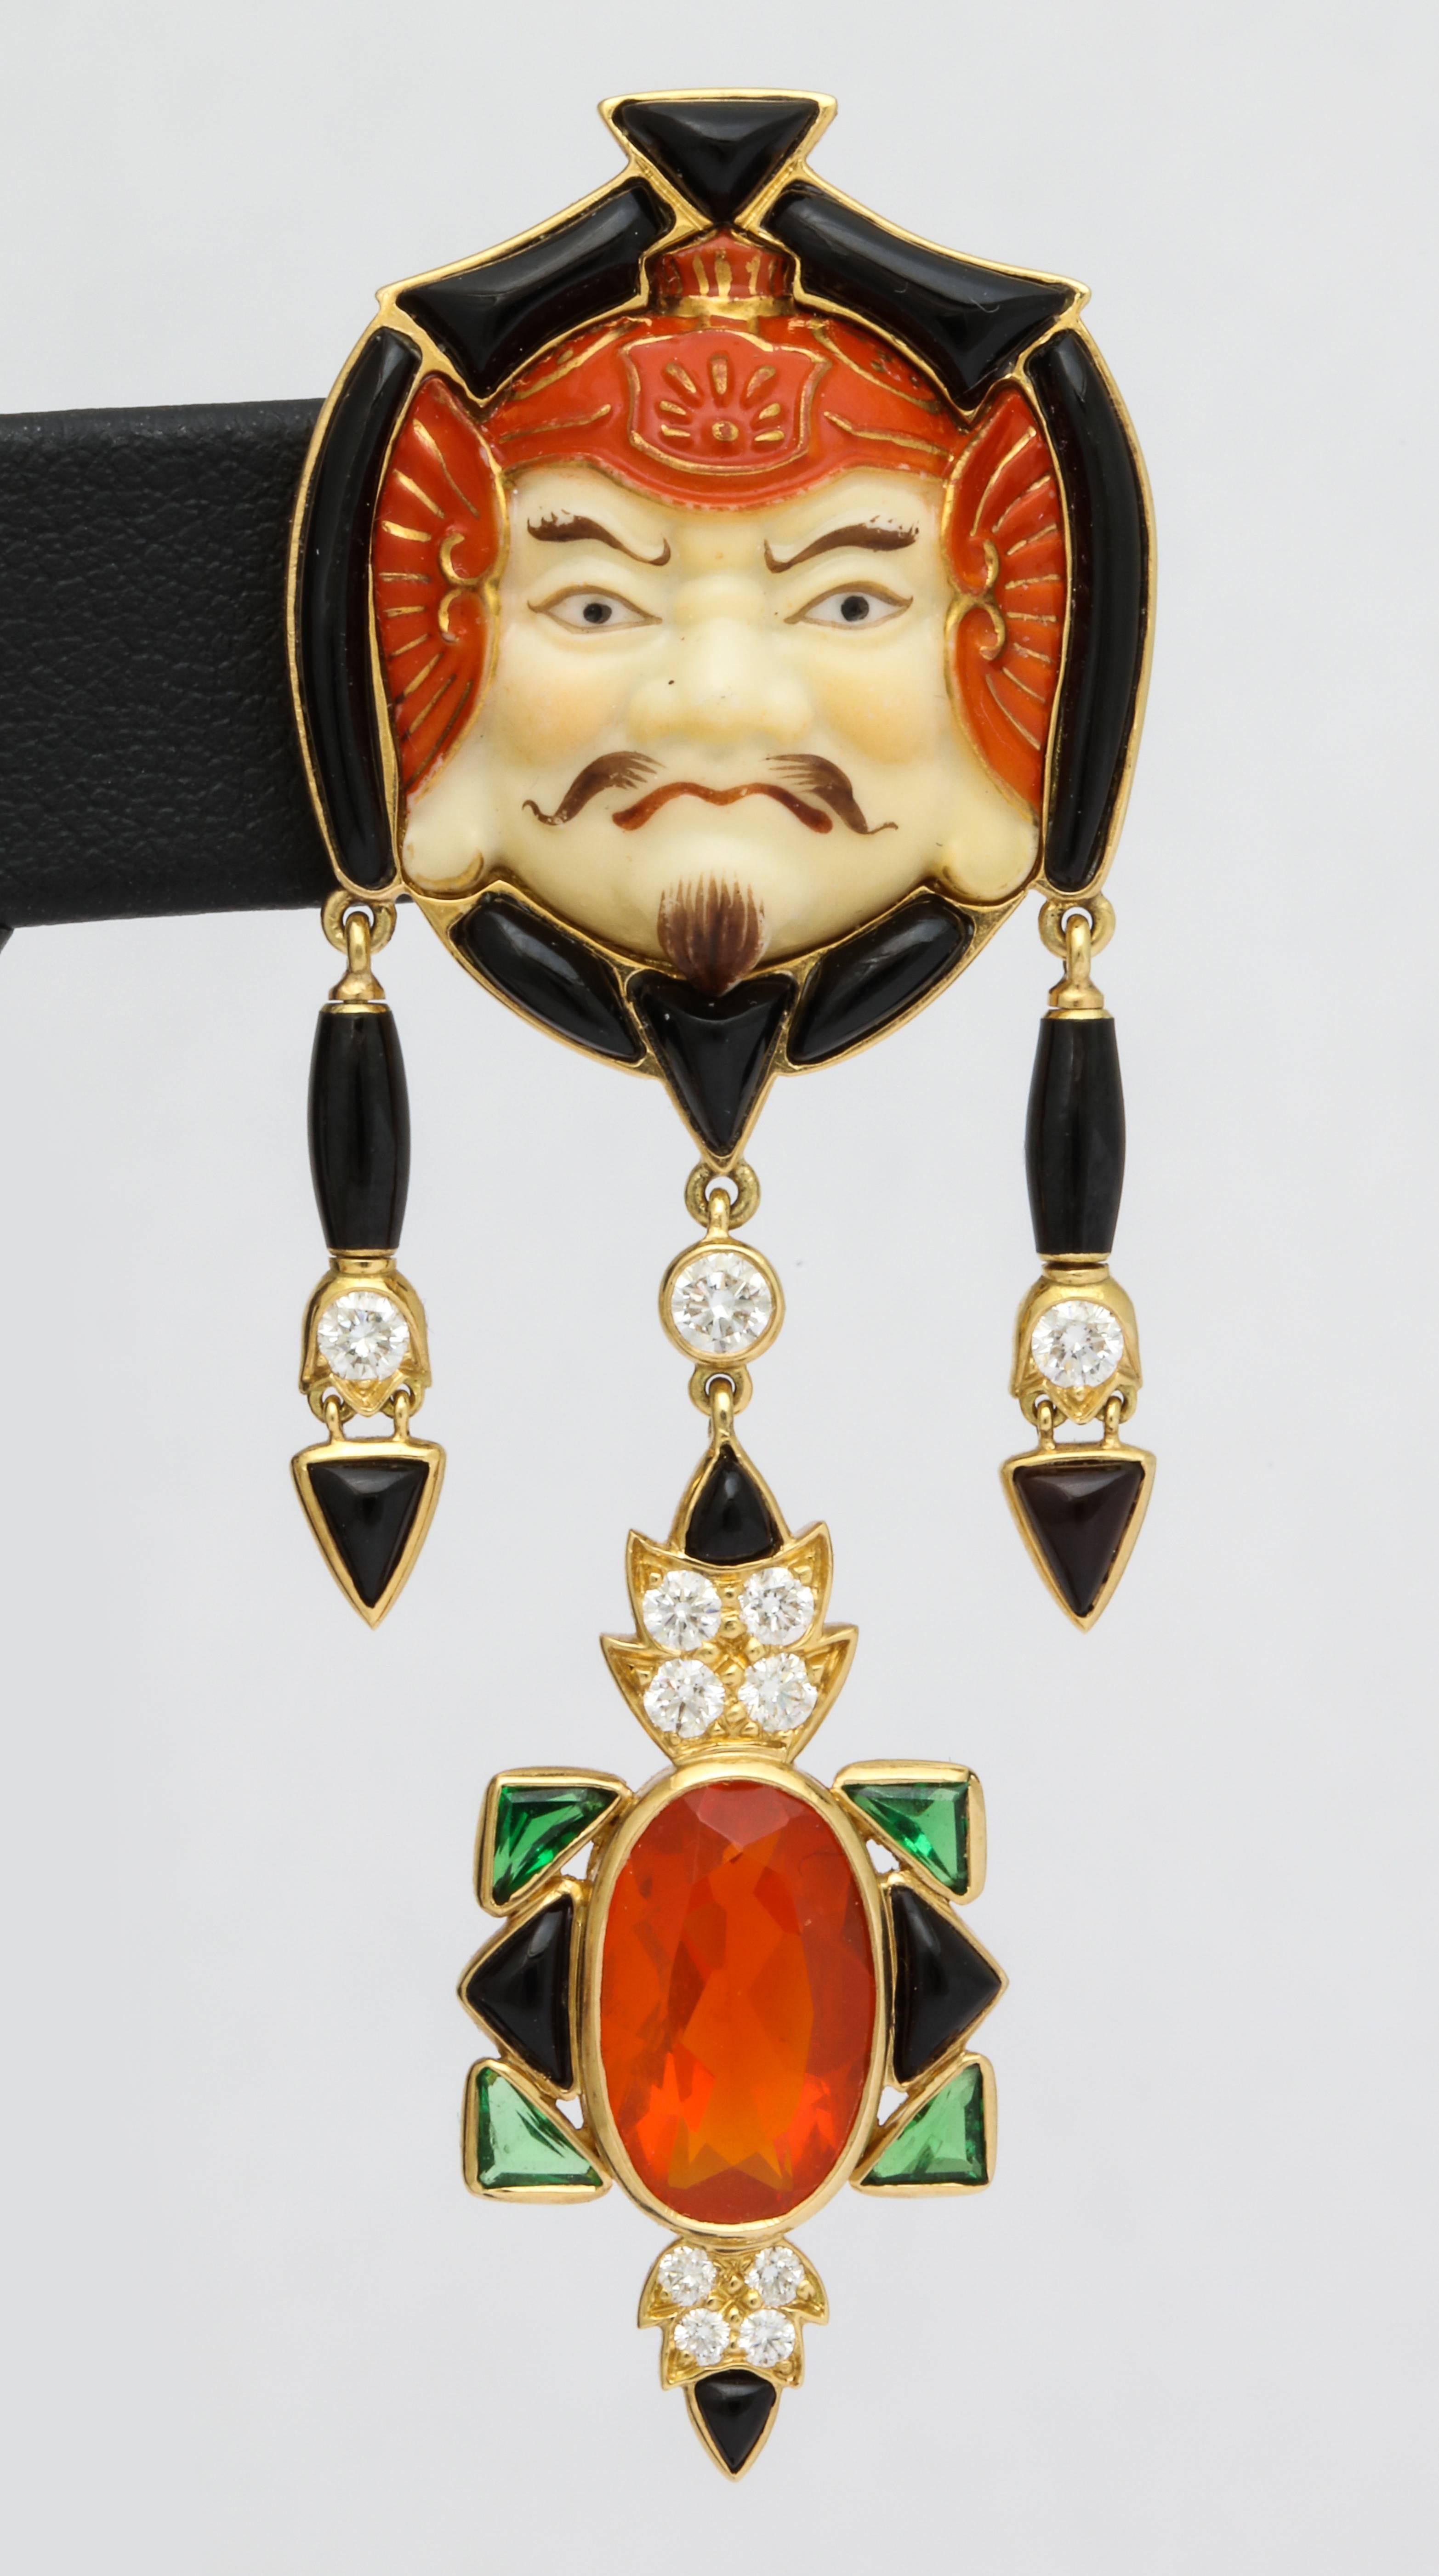 A one of a kind mixture of old and new, Cooperman never fails to create a truly special design.  The Japanese masks depict Bishamonten, who is one of The Seven Immortal Gods of Fortune- specifically The God of Dignity.  He is known as the protector